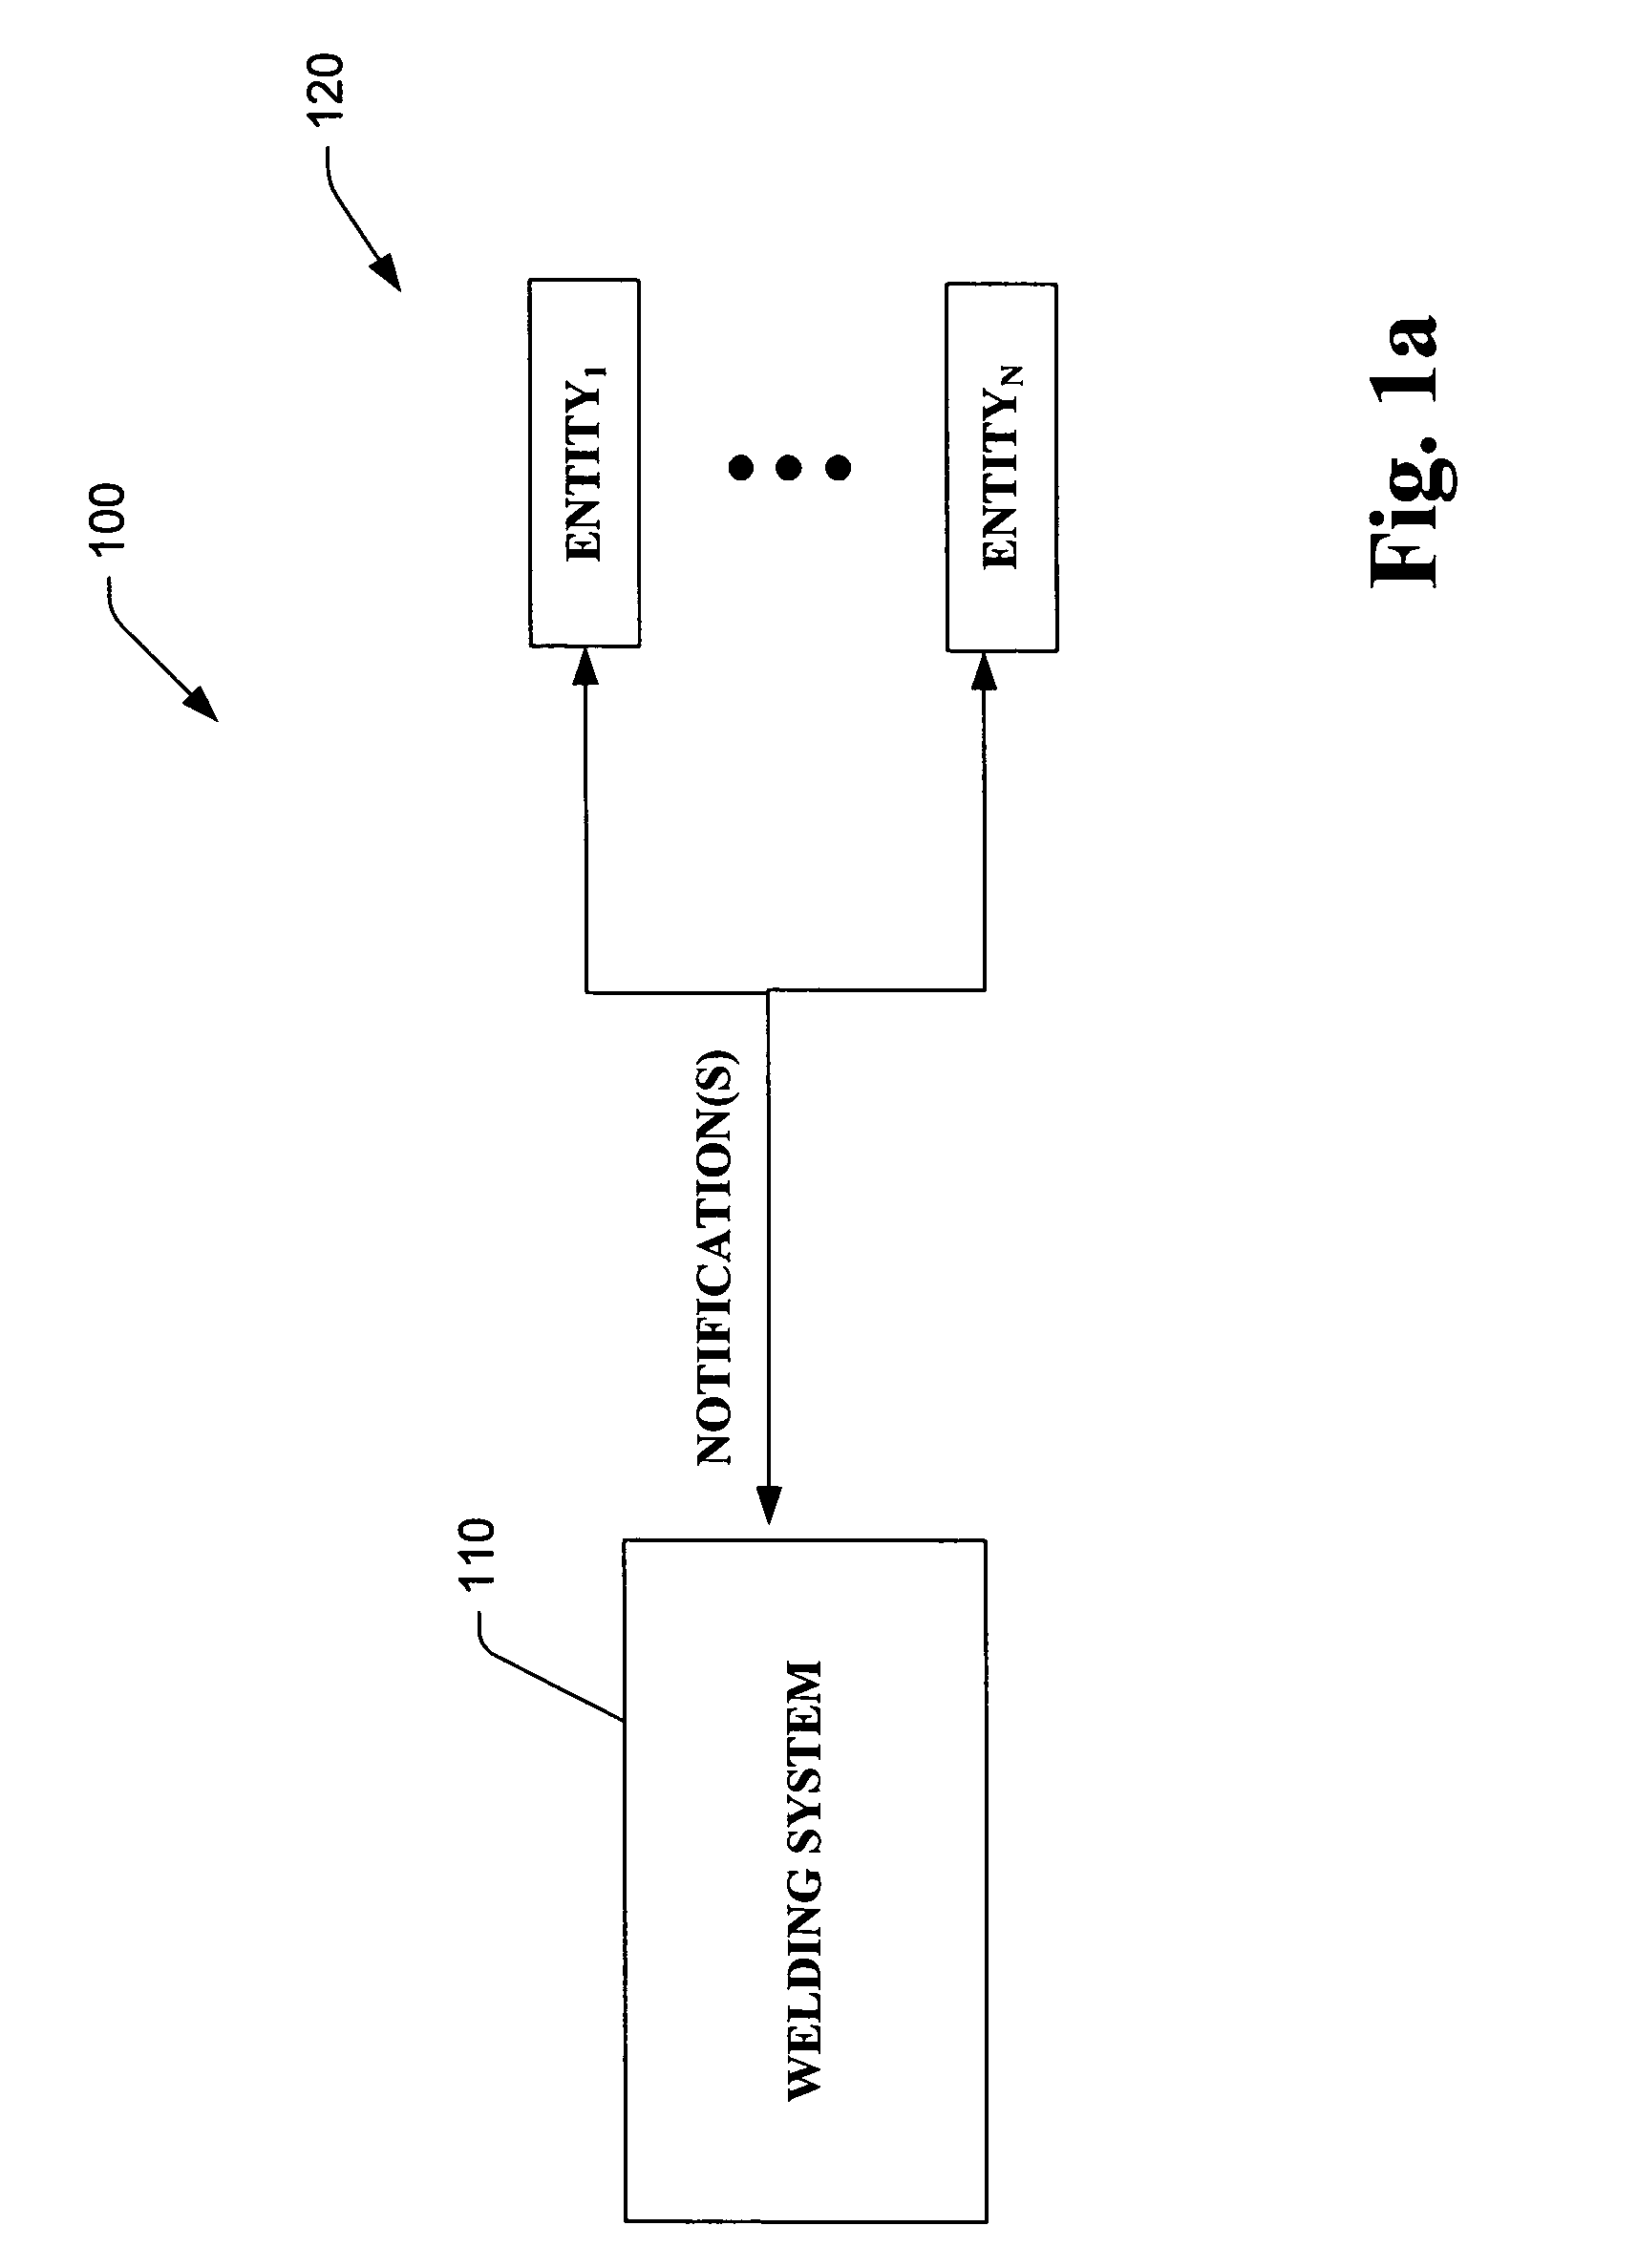 System and method providing automated welding notification